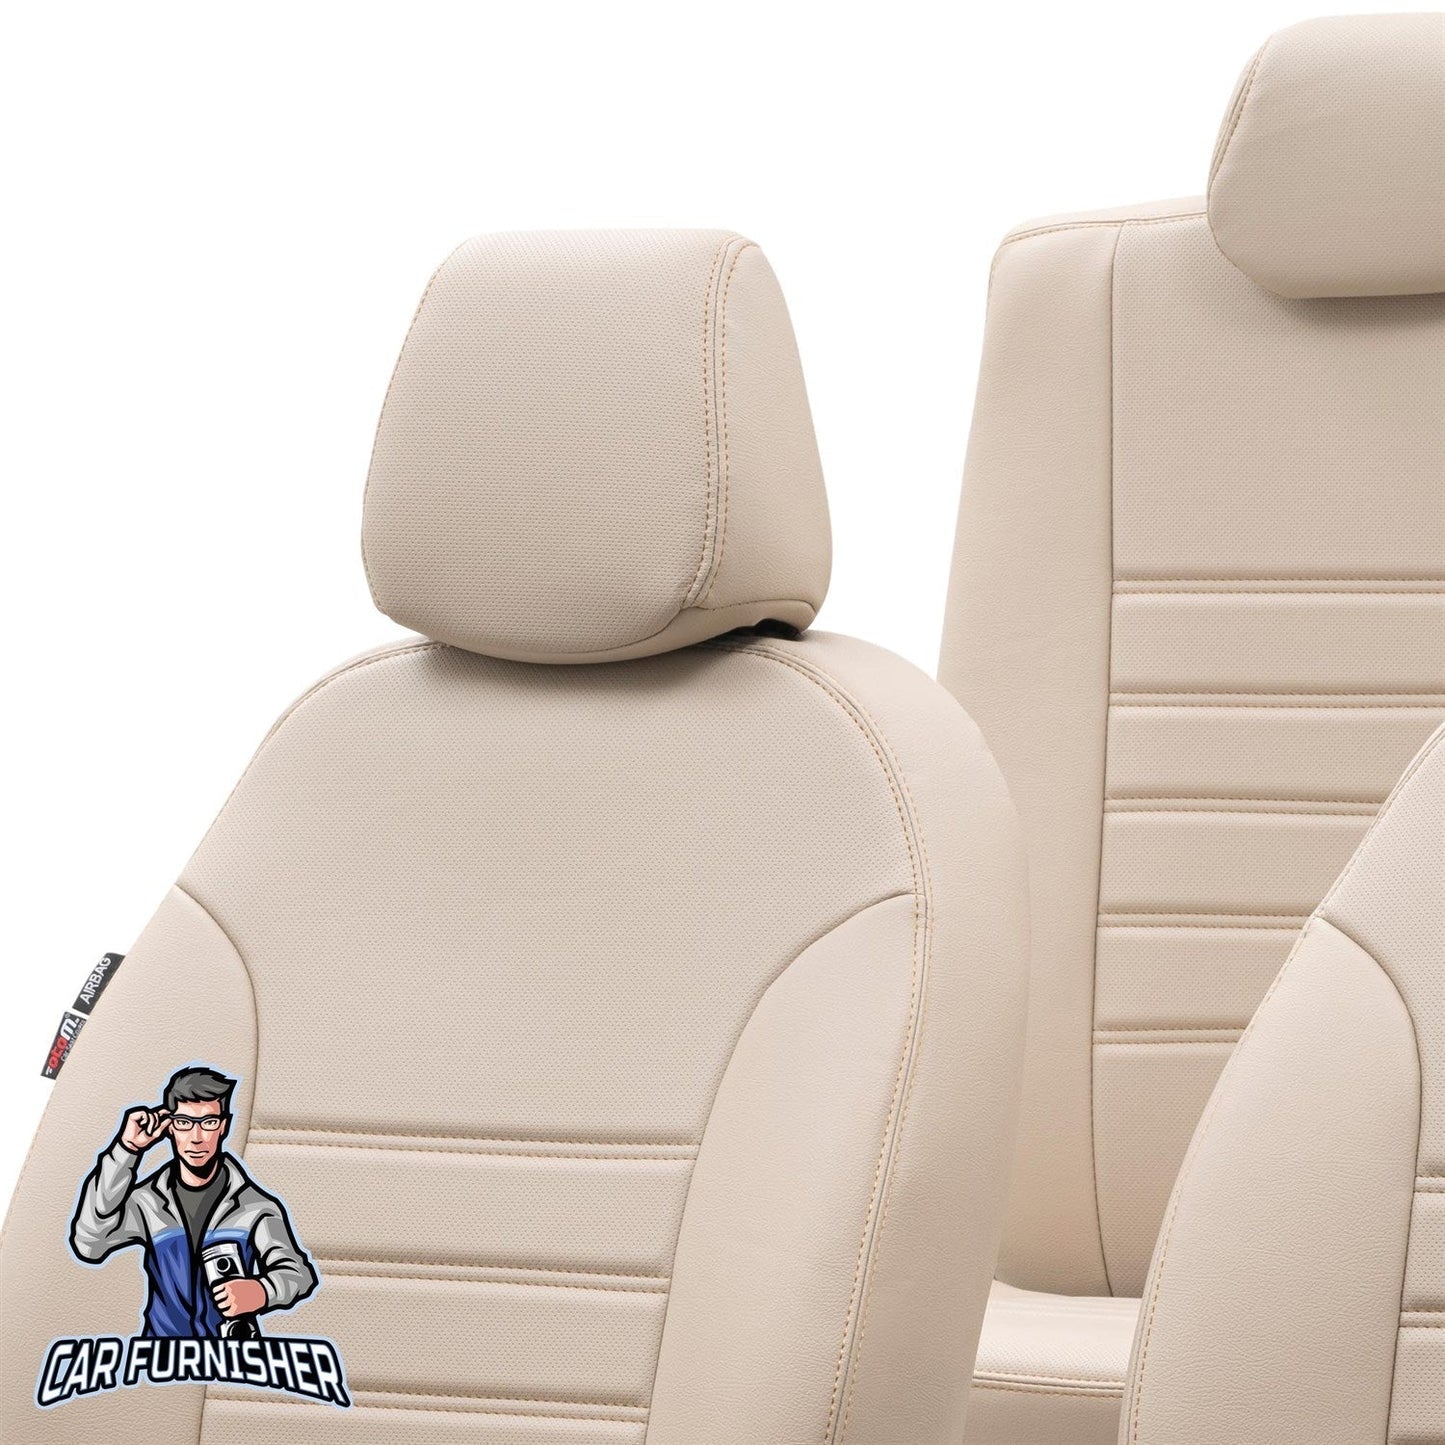 Nissan Interstar Seat Cover Istanbul Leather Design Beige Leather